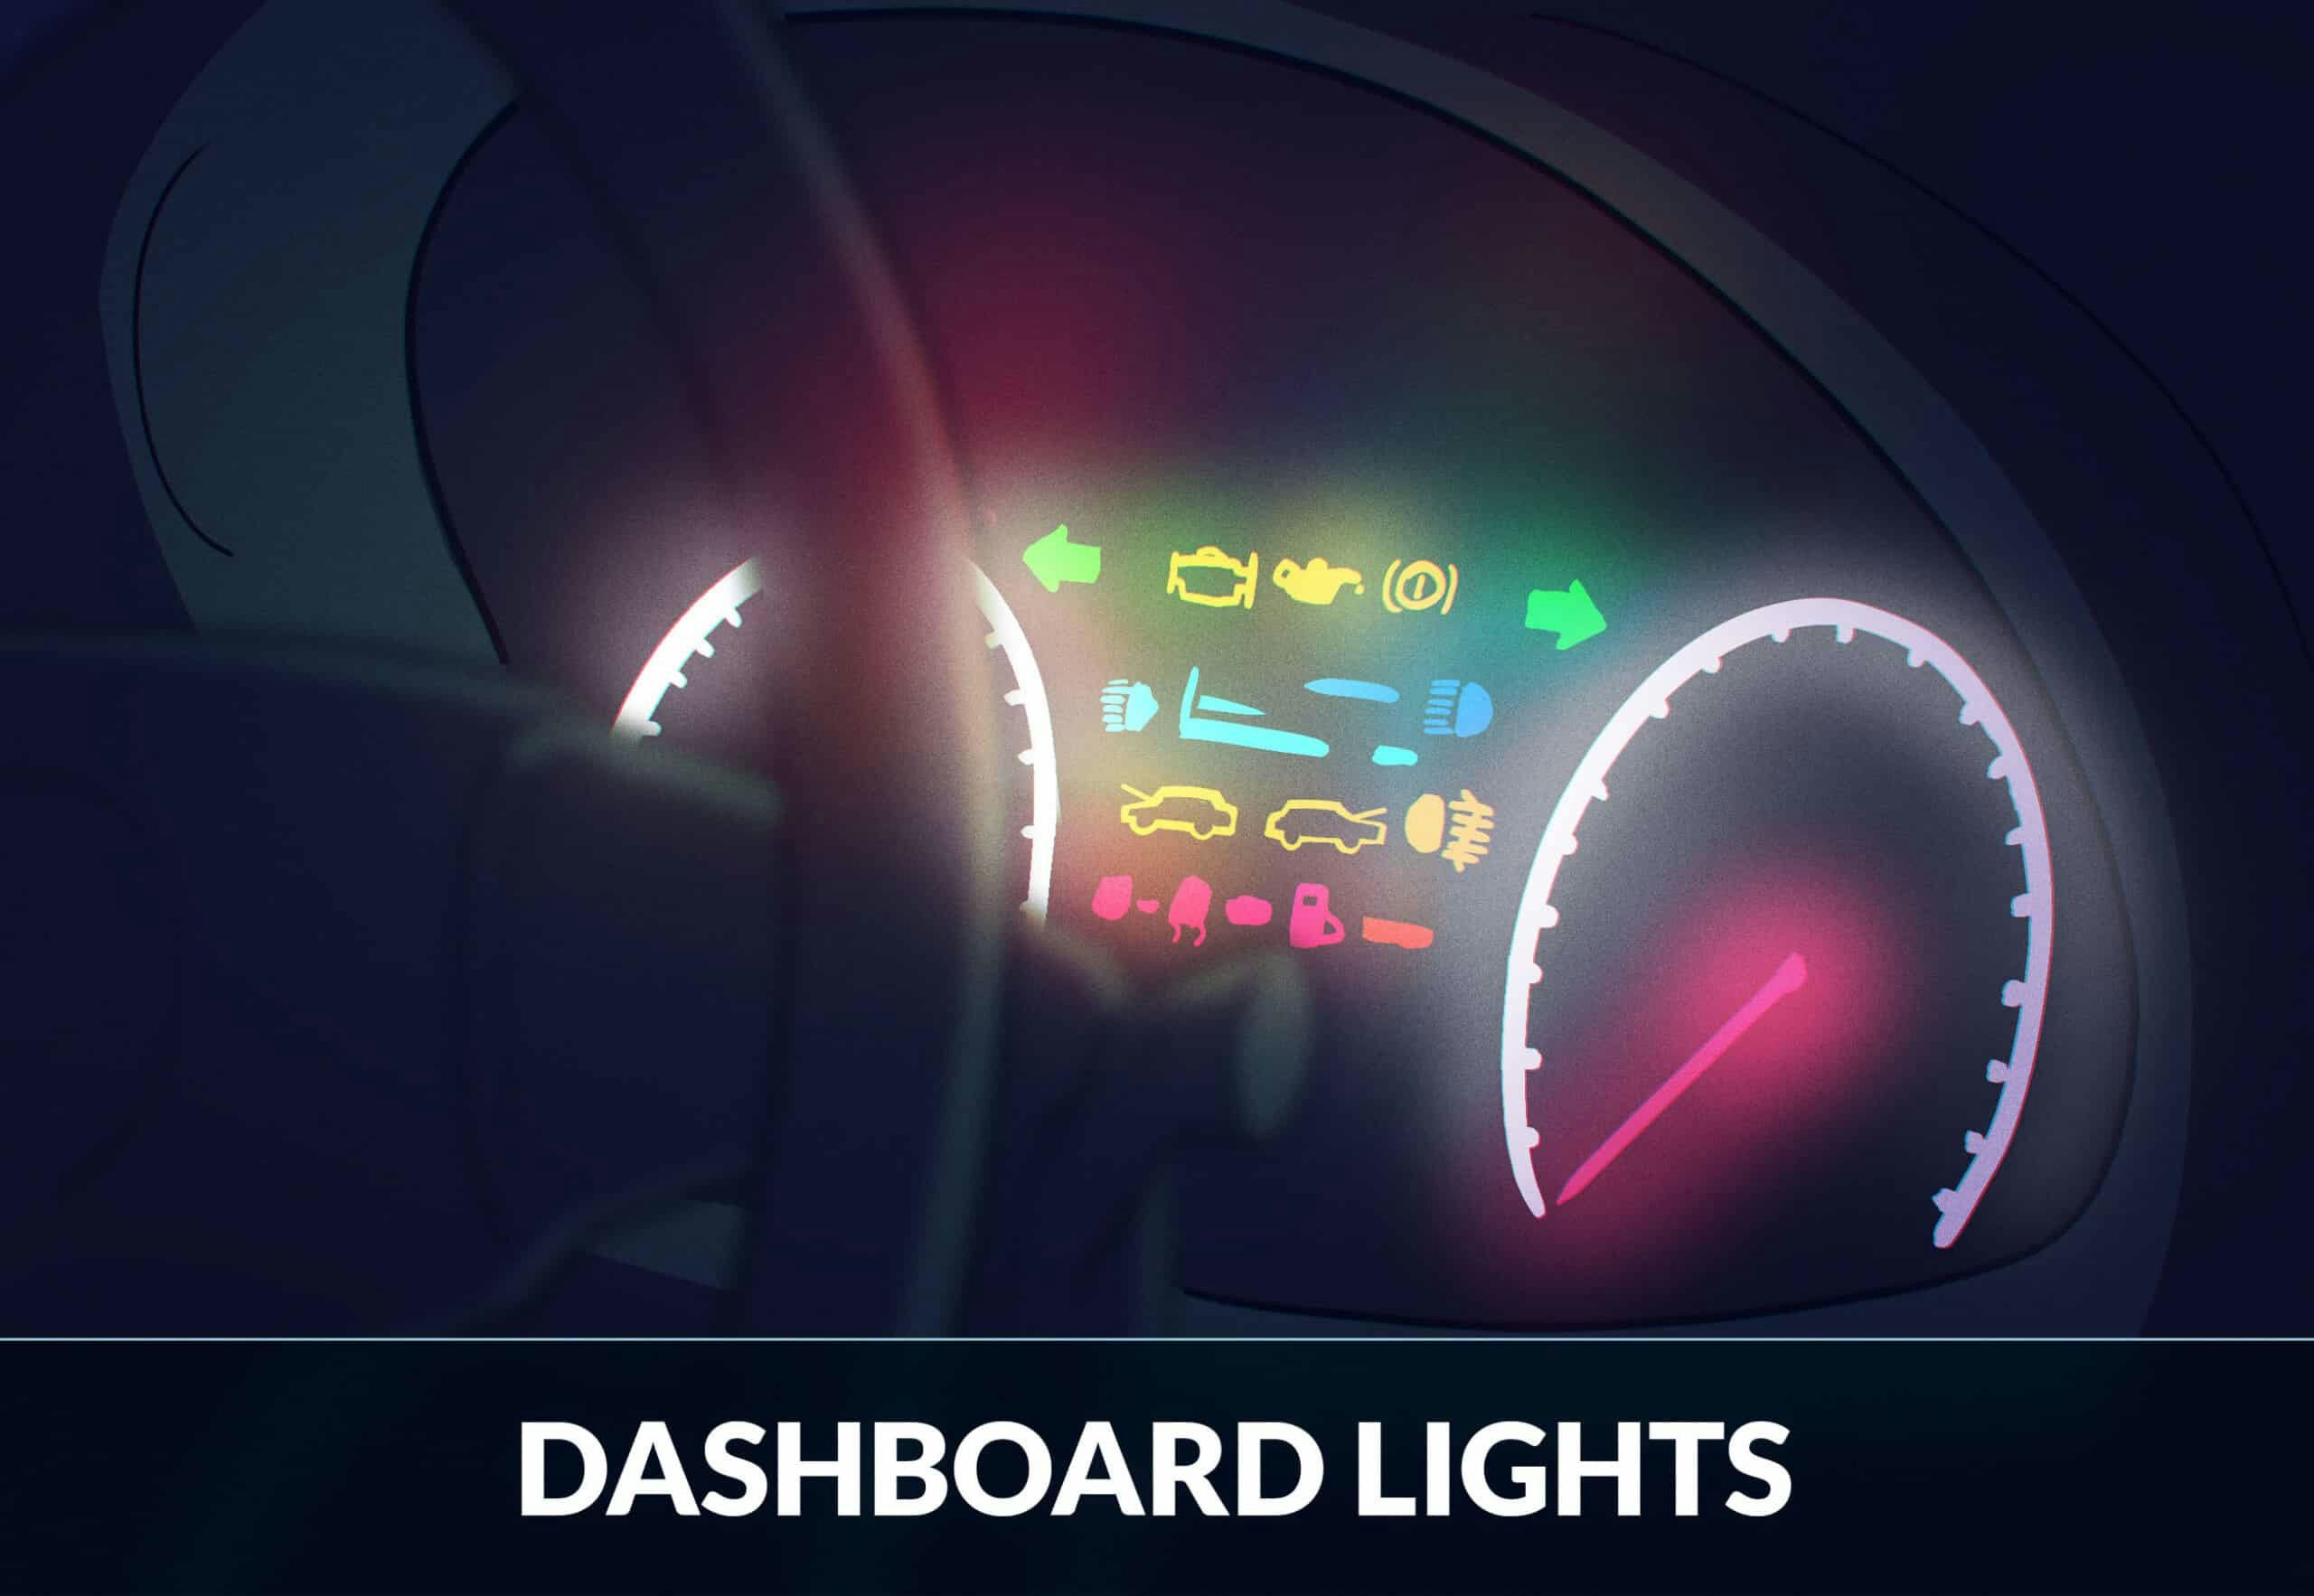 What do dashboard warning lights in my car mean?